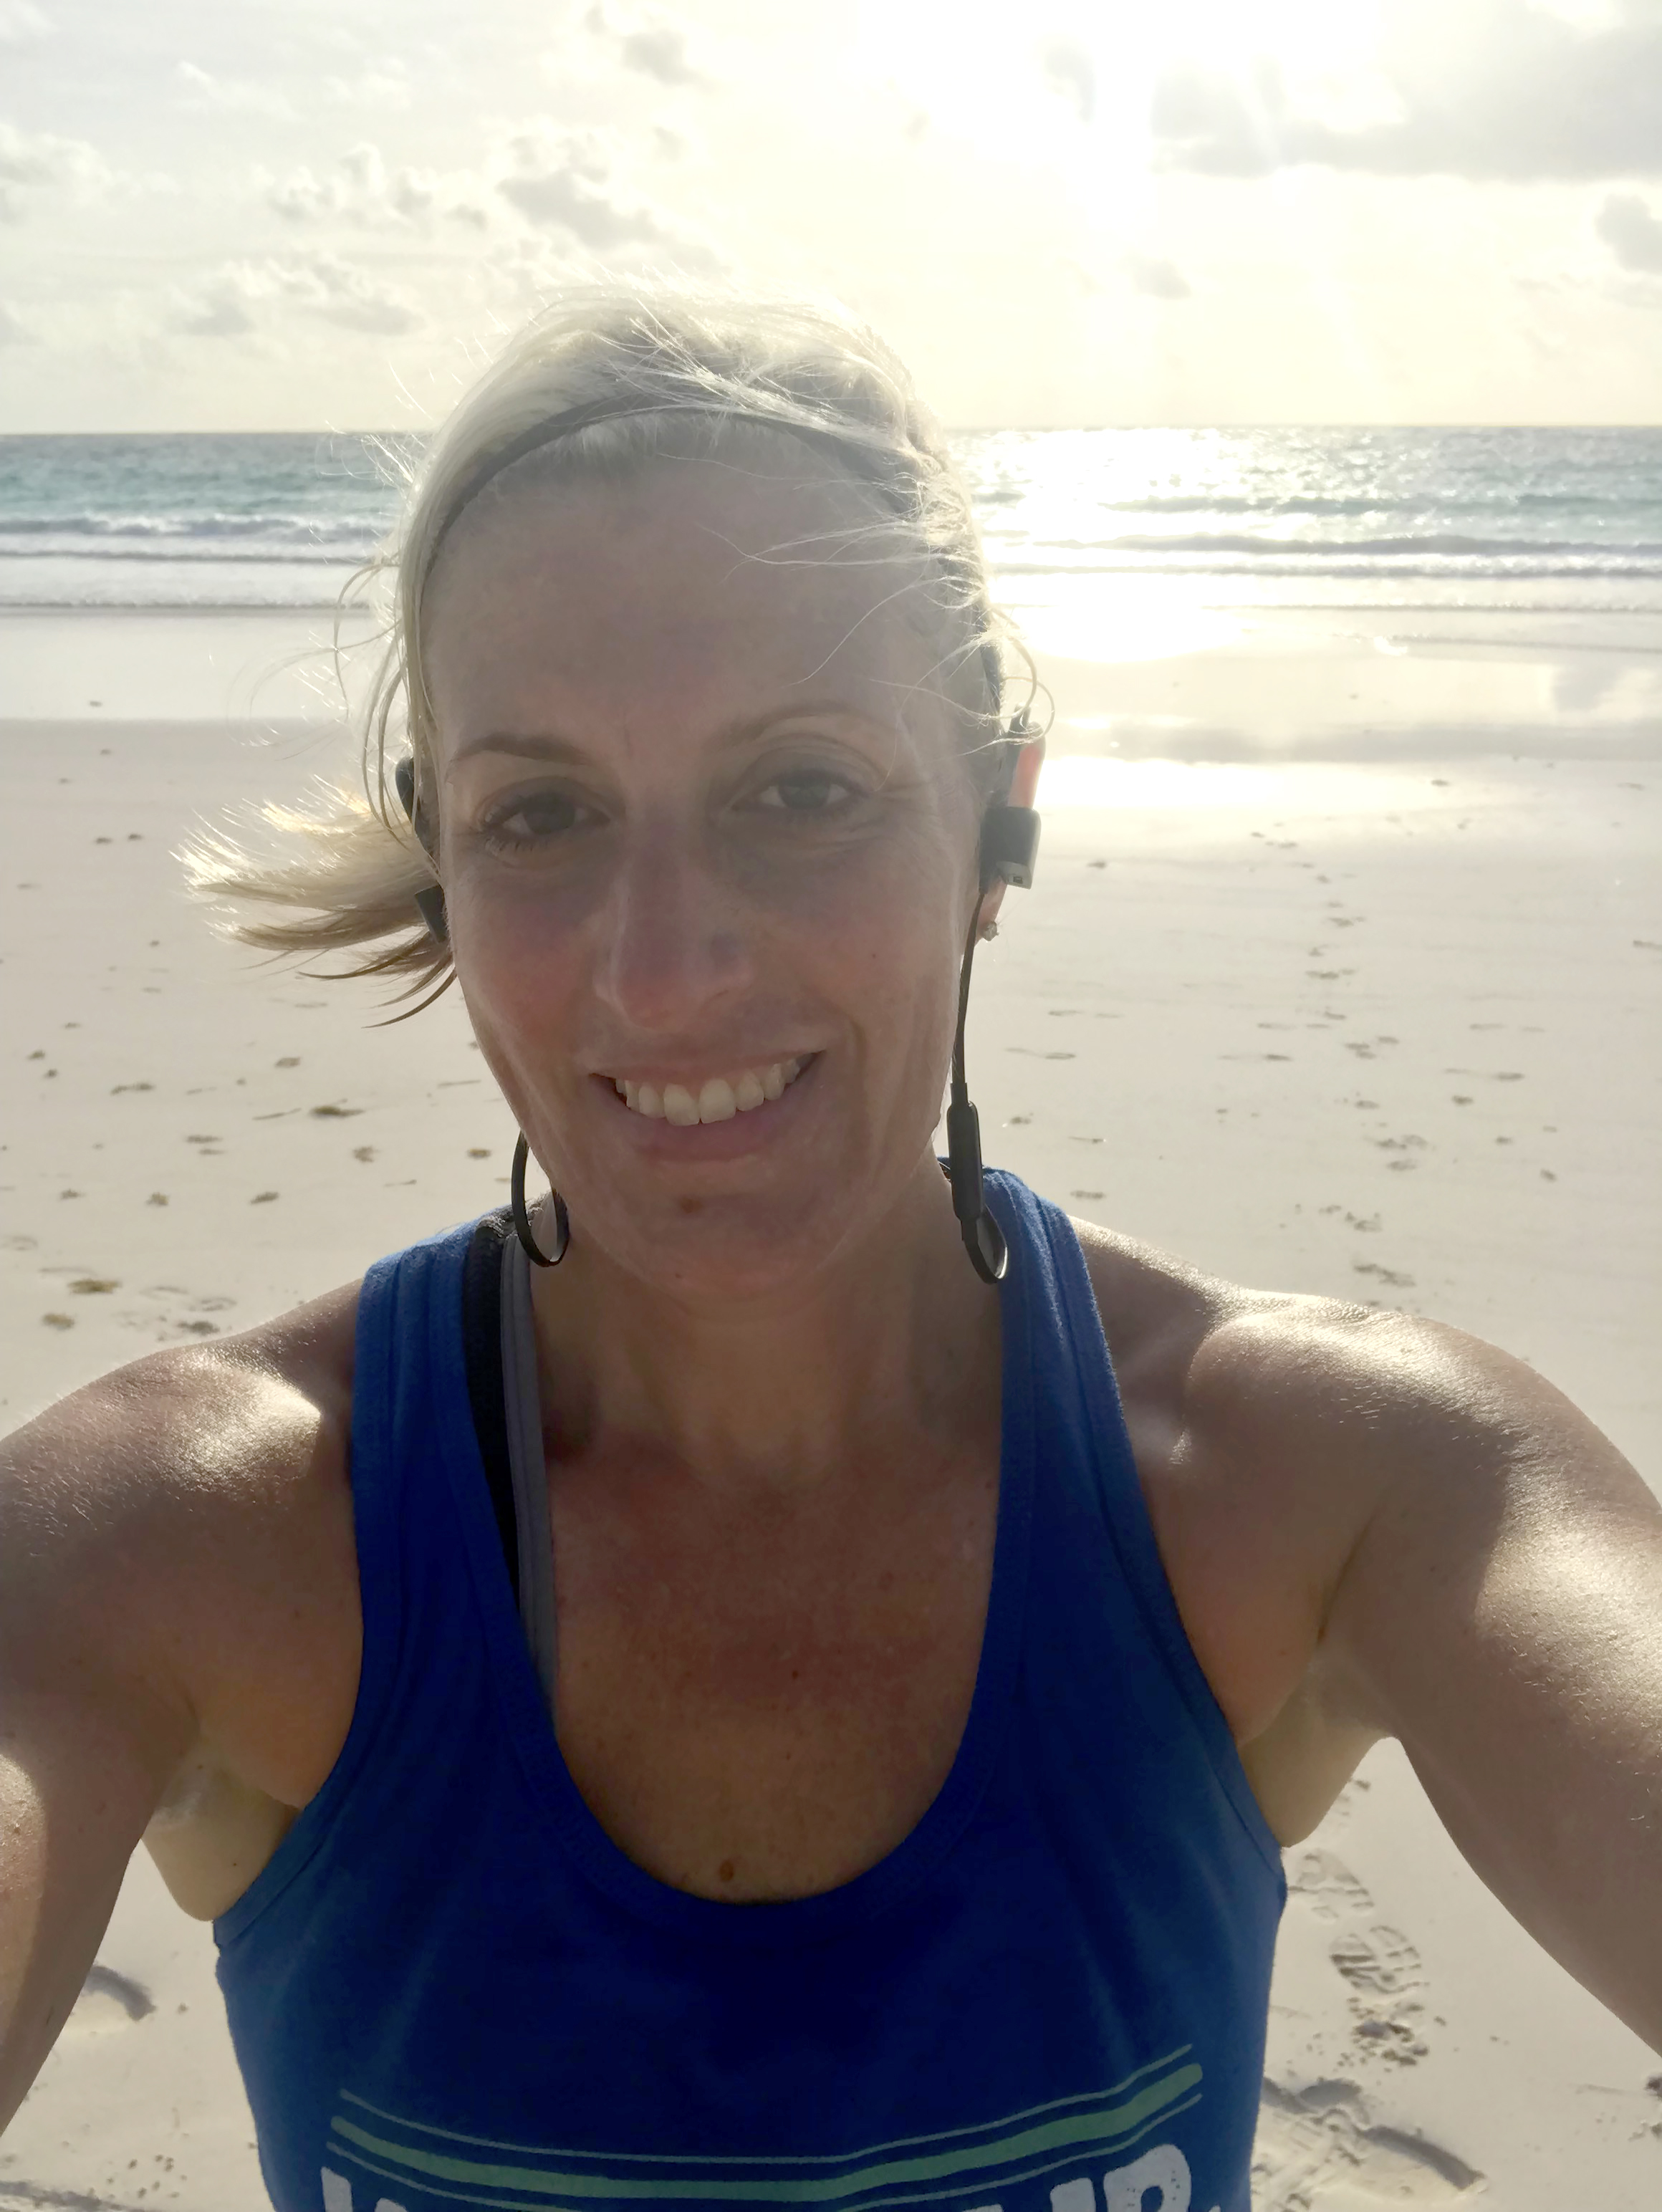 Alison Houck doesn't let vacation stop her from exercising. Here she is running on the beach in the Bahamas.